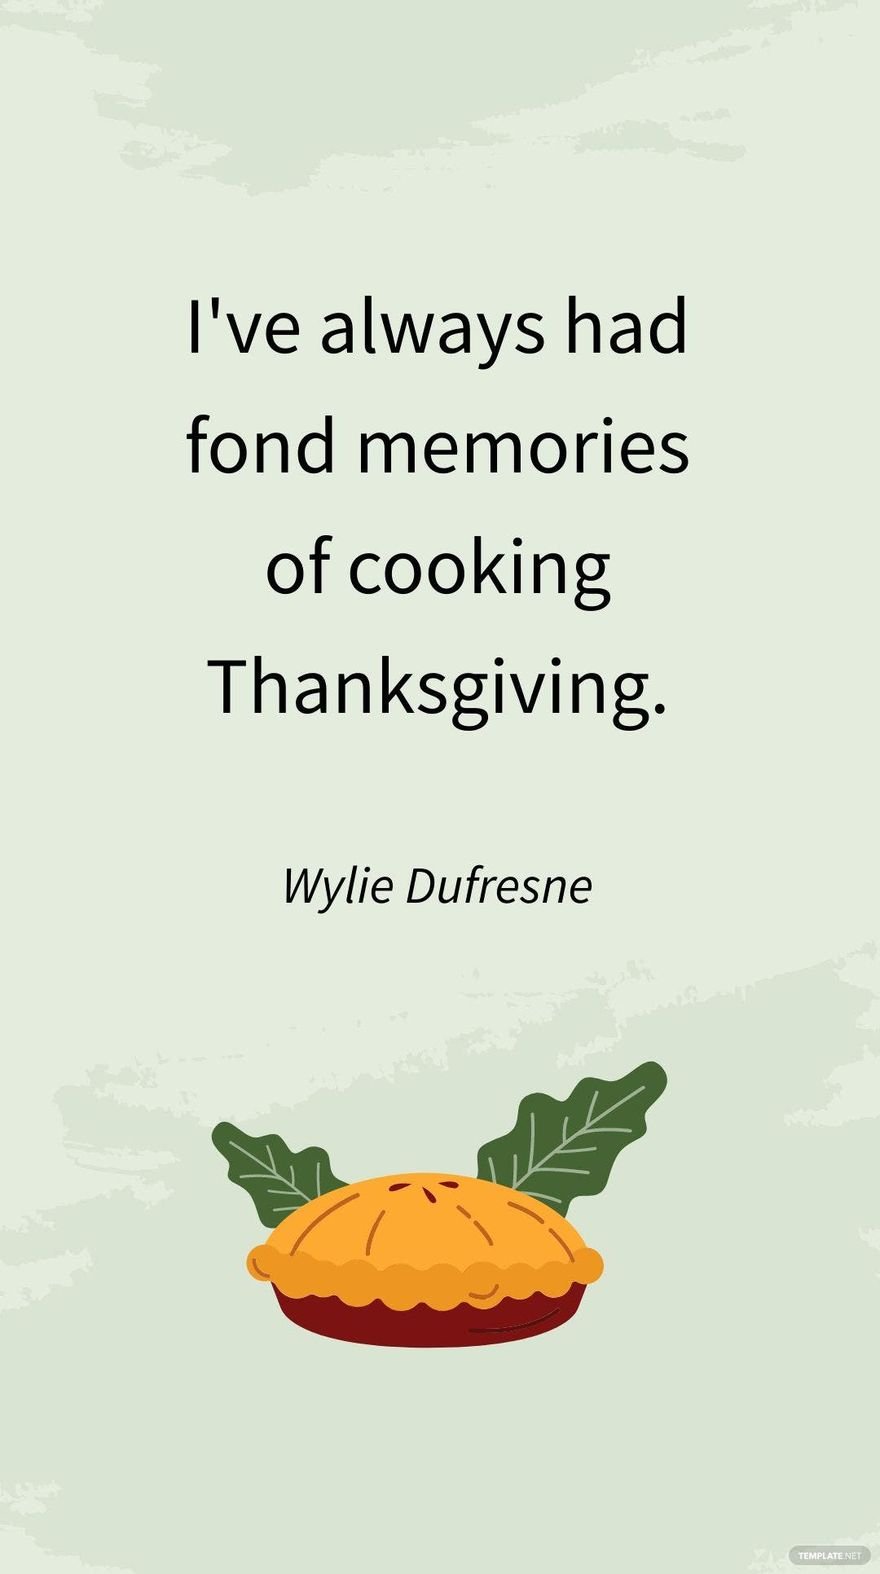 Wylie Dufresne - I've always had fond memories of cooking Thanksgiving.